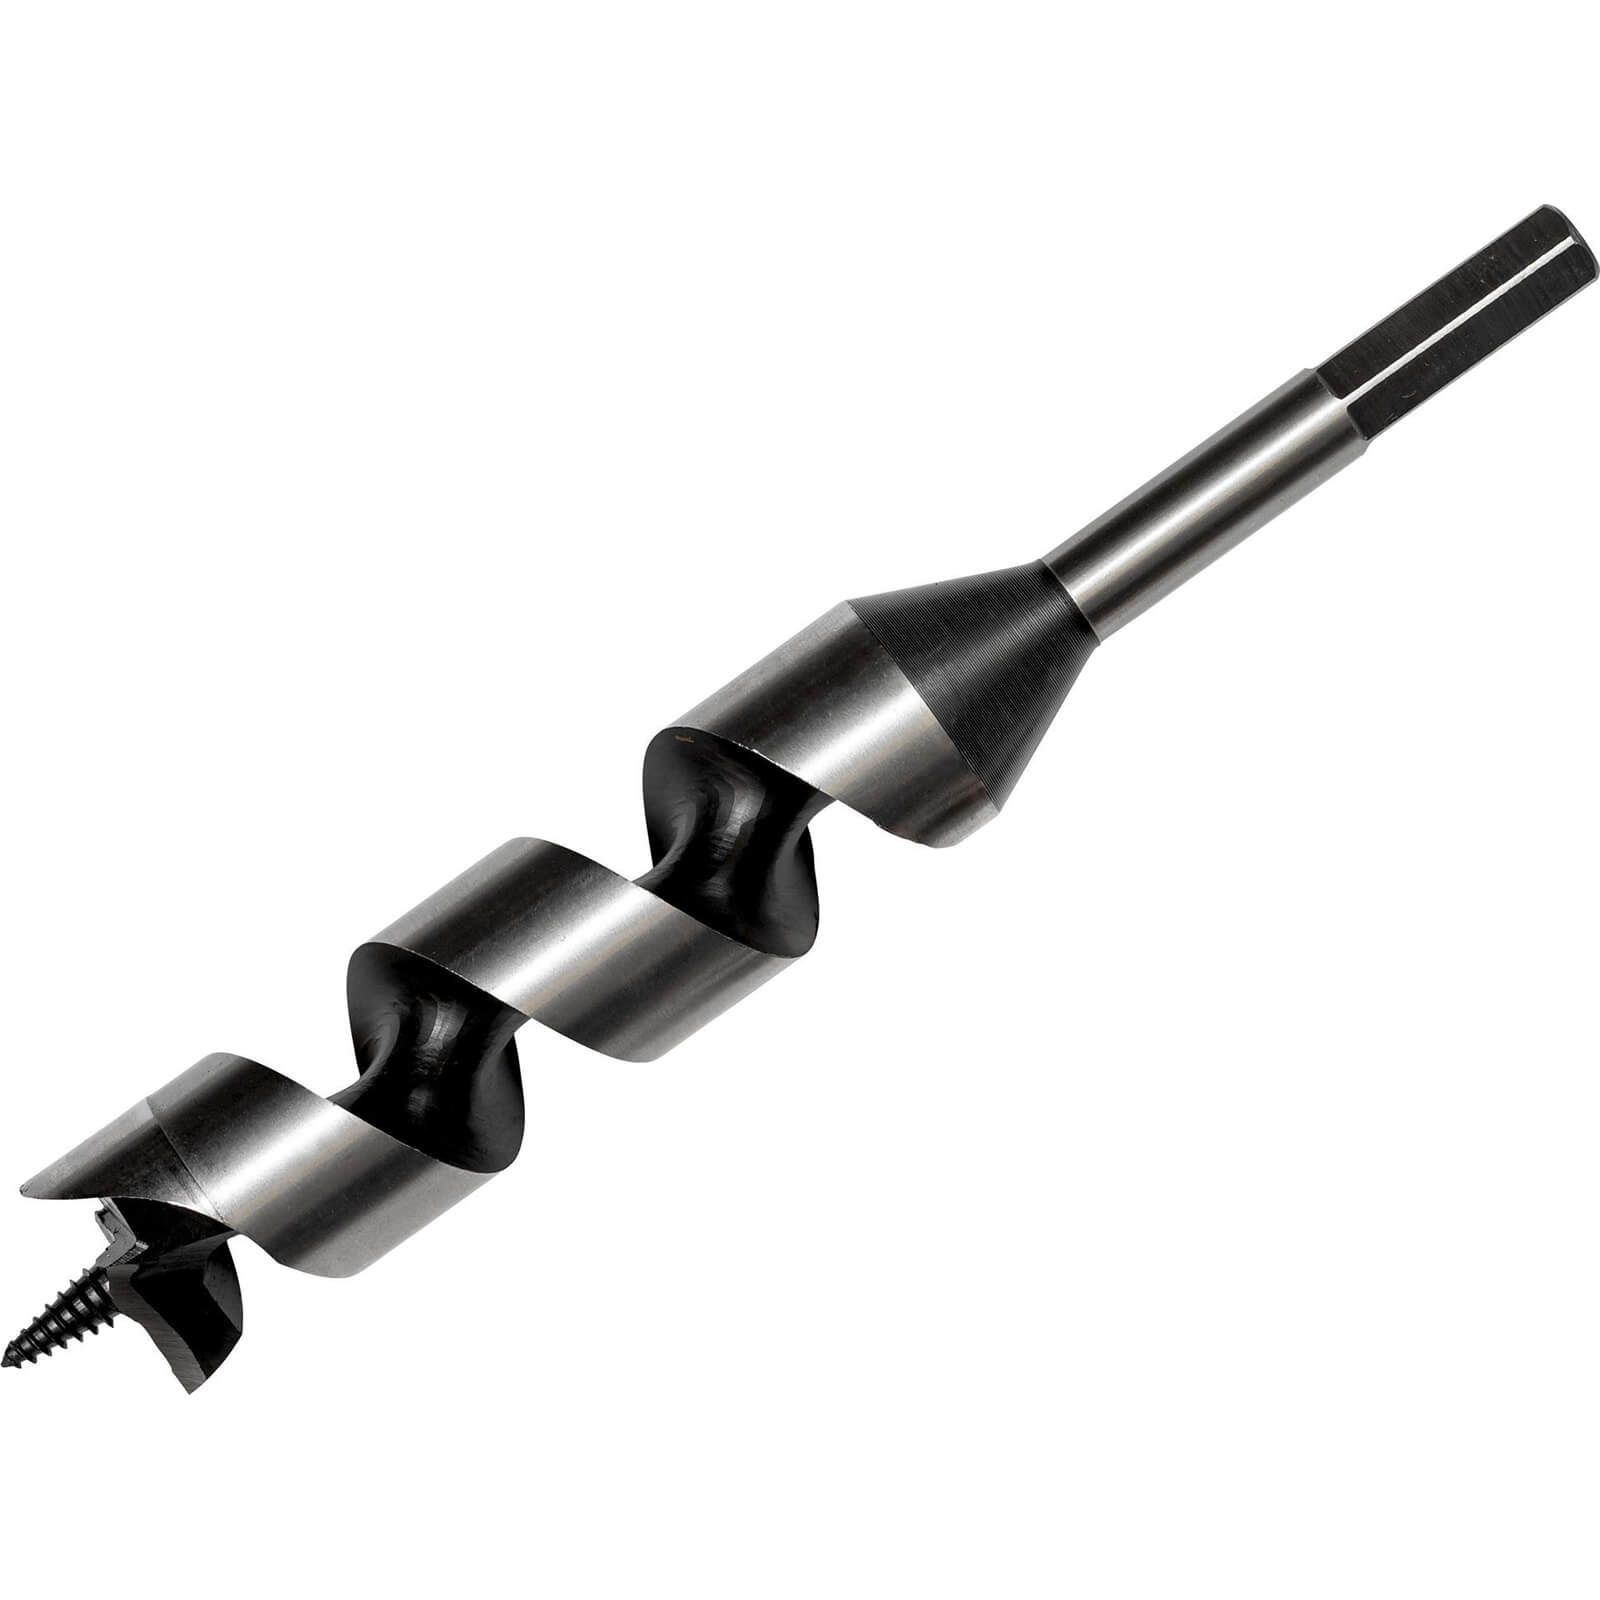 Photo of Bahco 9626 Series Combination Auger Drill Bit 6mm 230mm